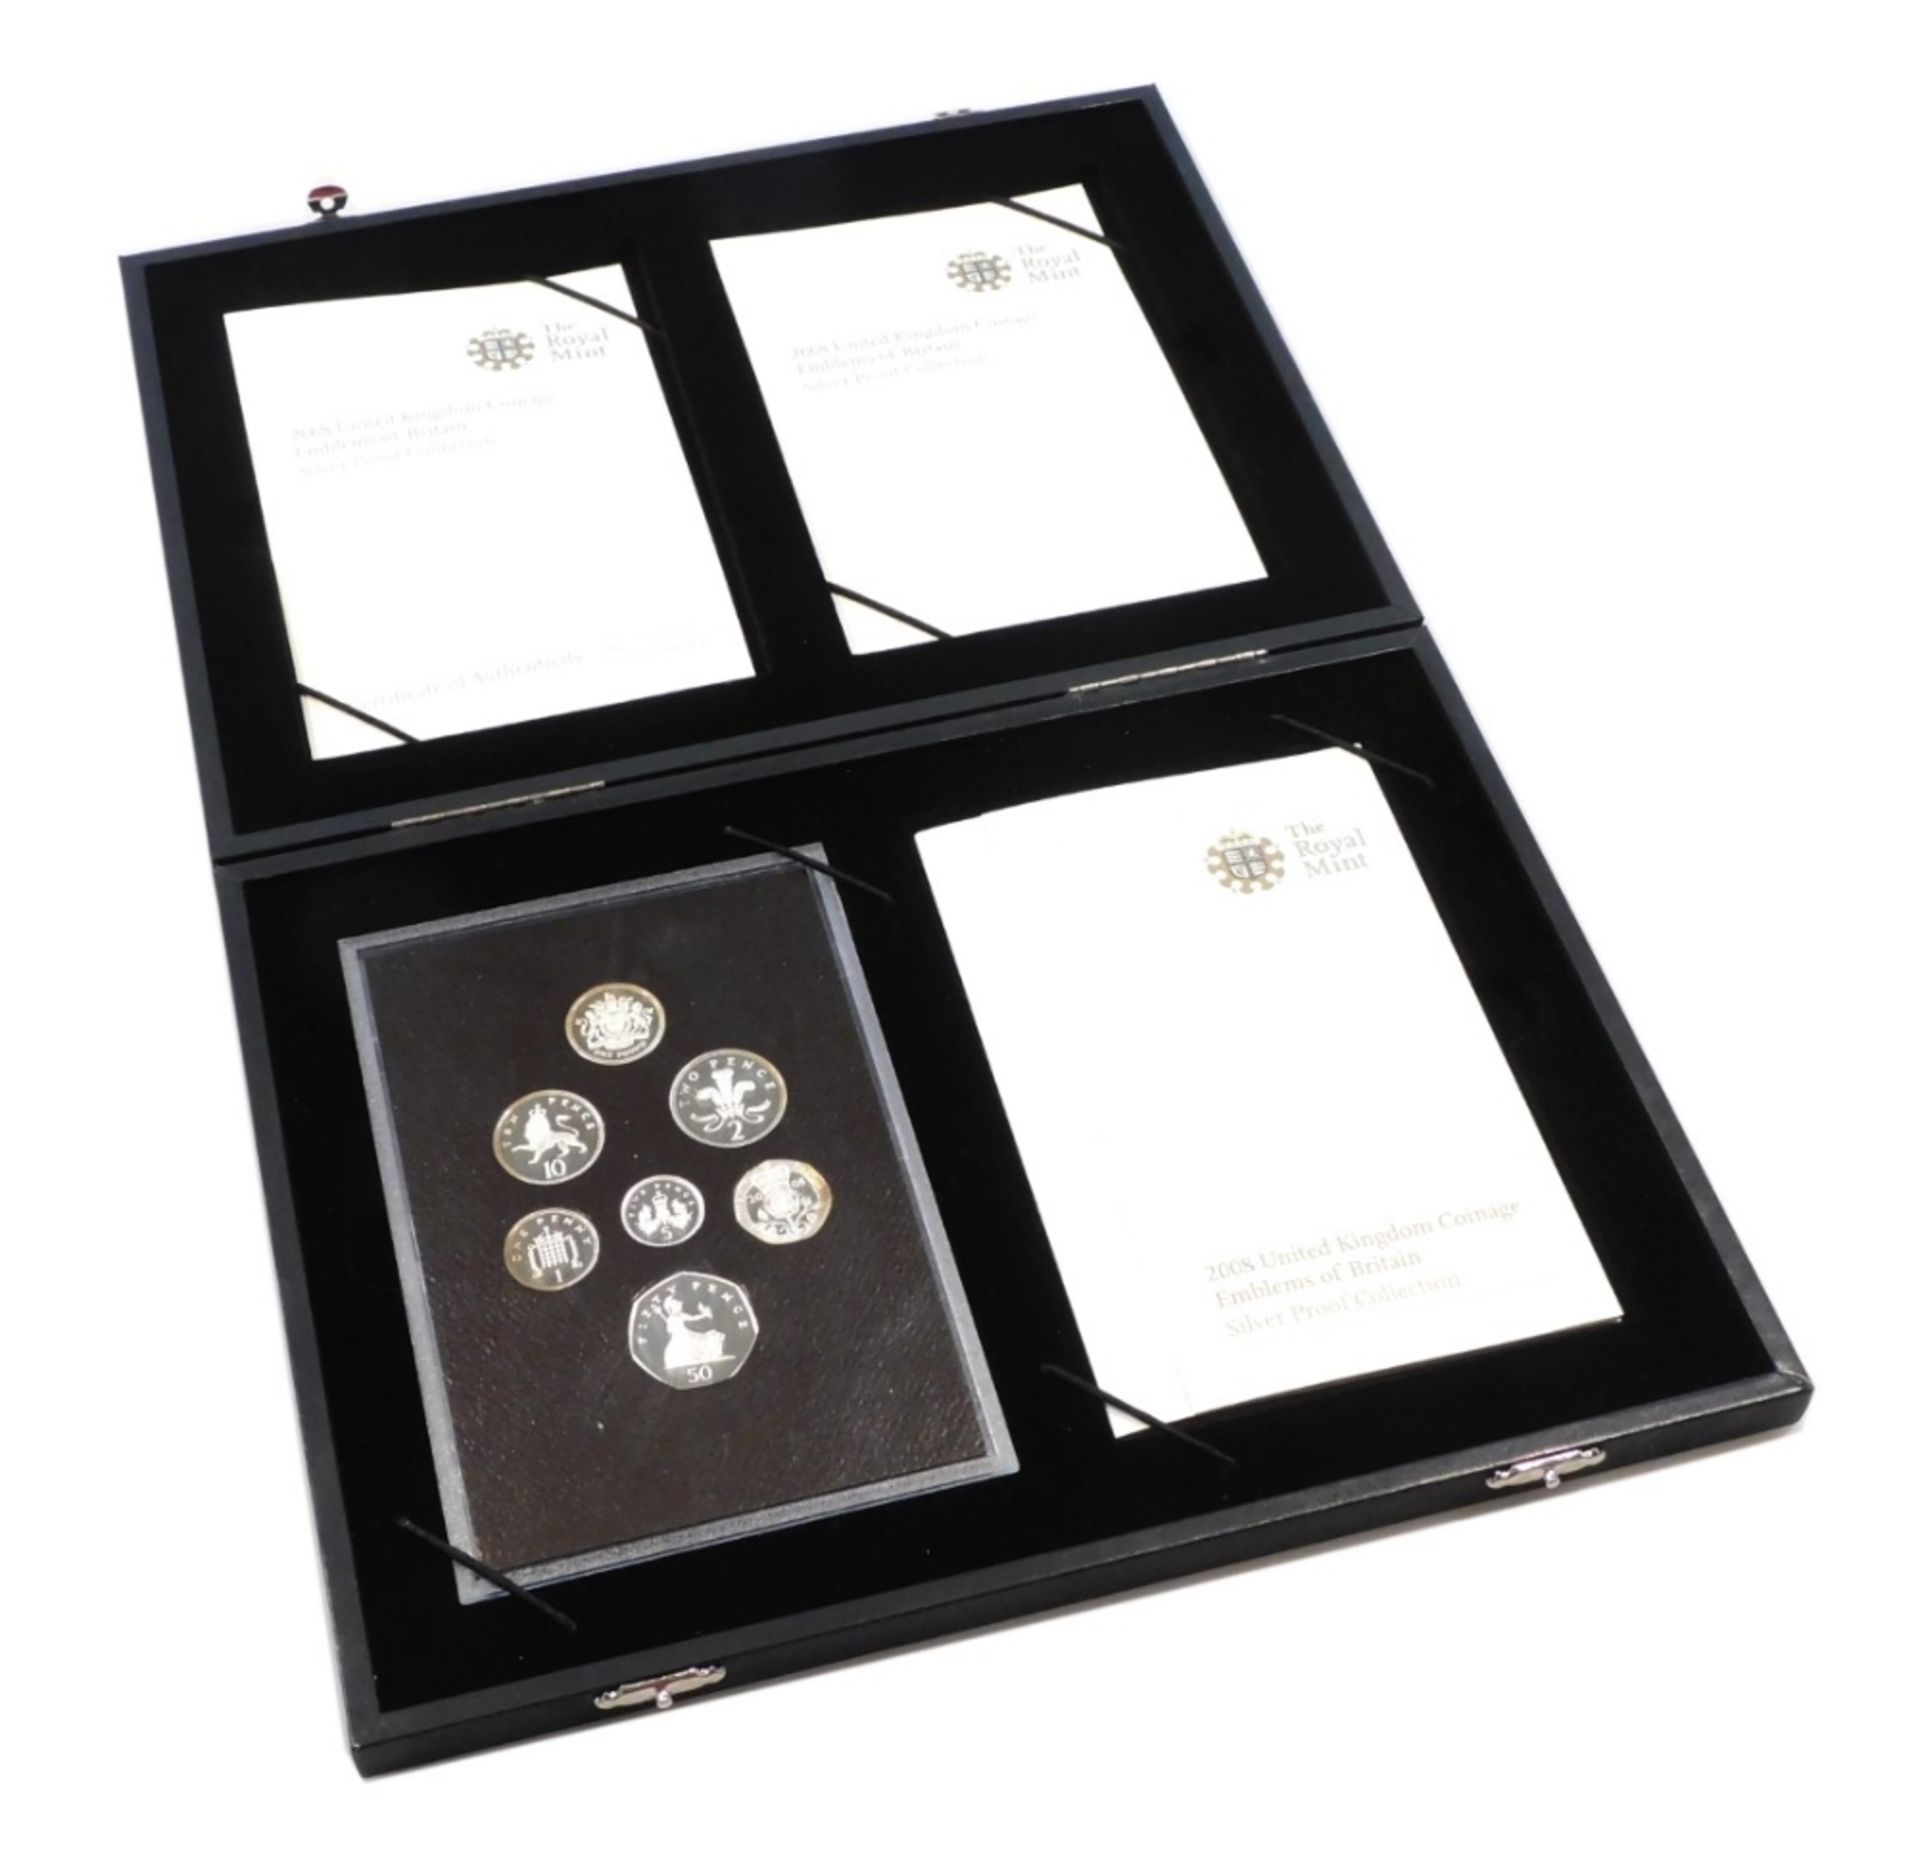 A Royal Mint 2008 United Kingdom Coinage Emblems of Britain silver proof collection, the fitted case